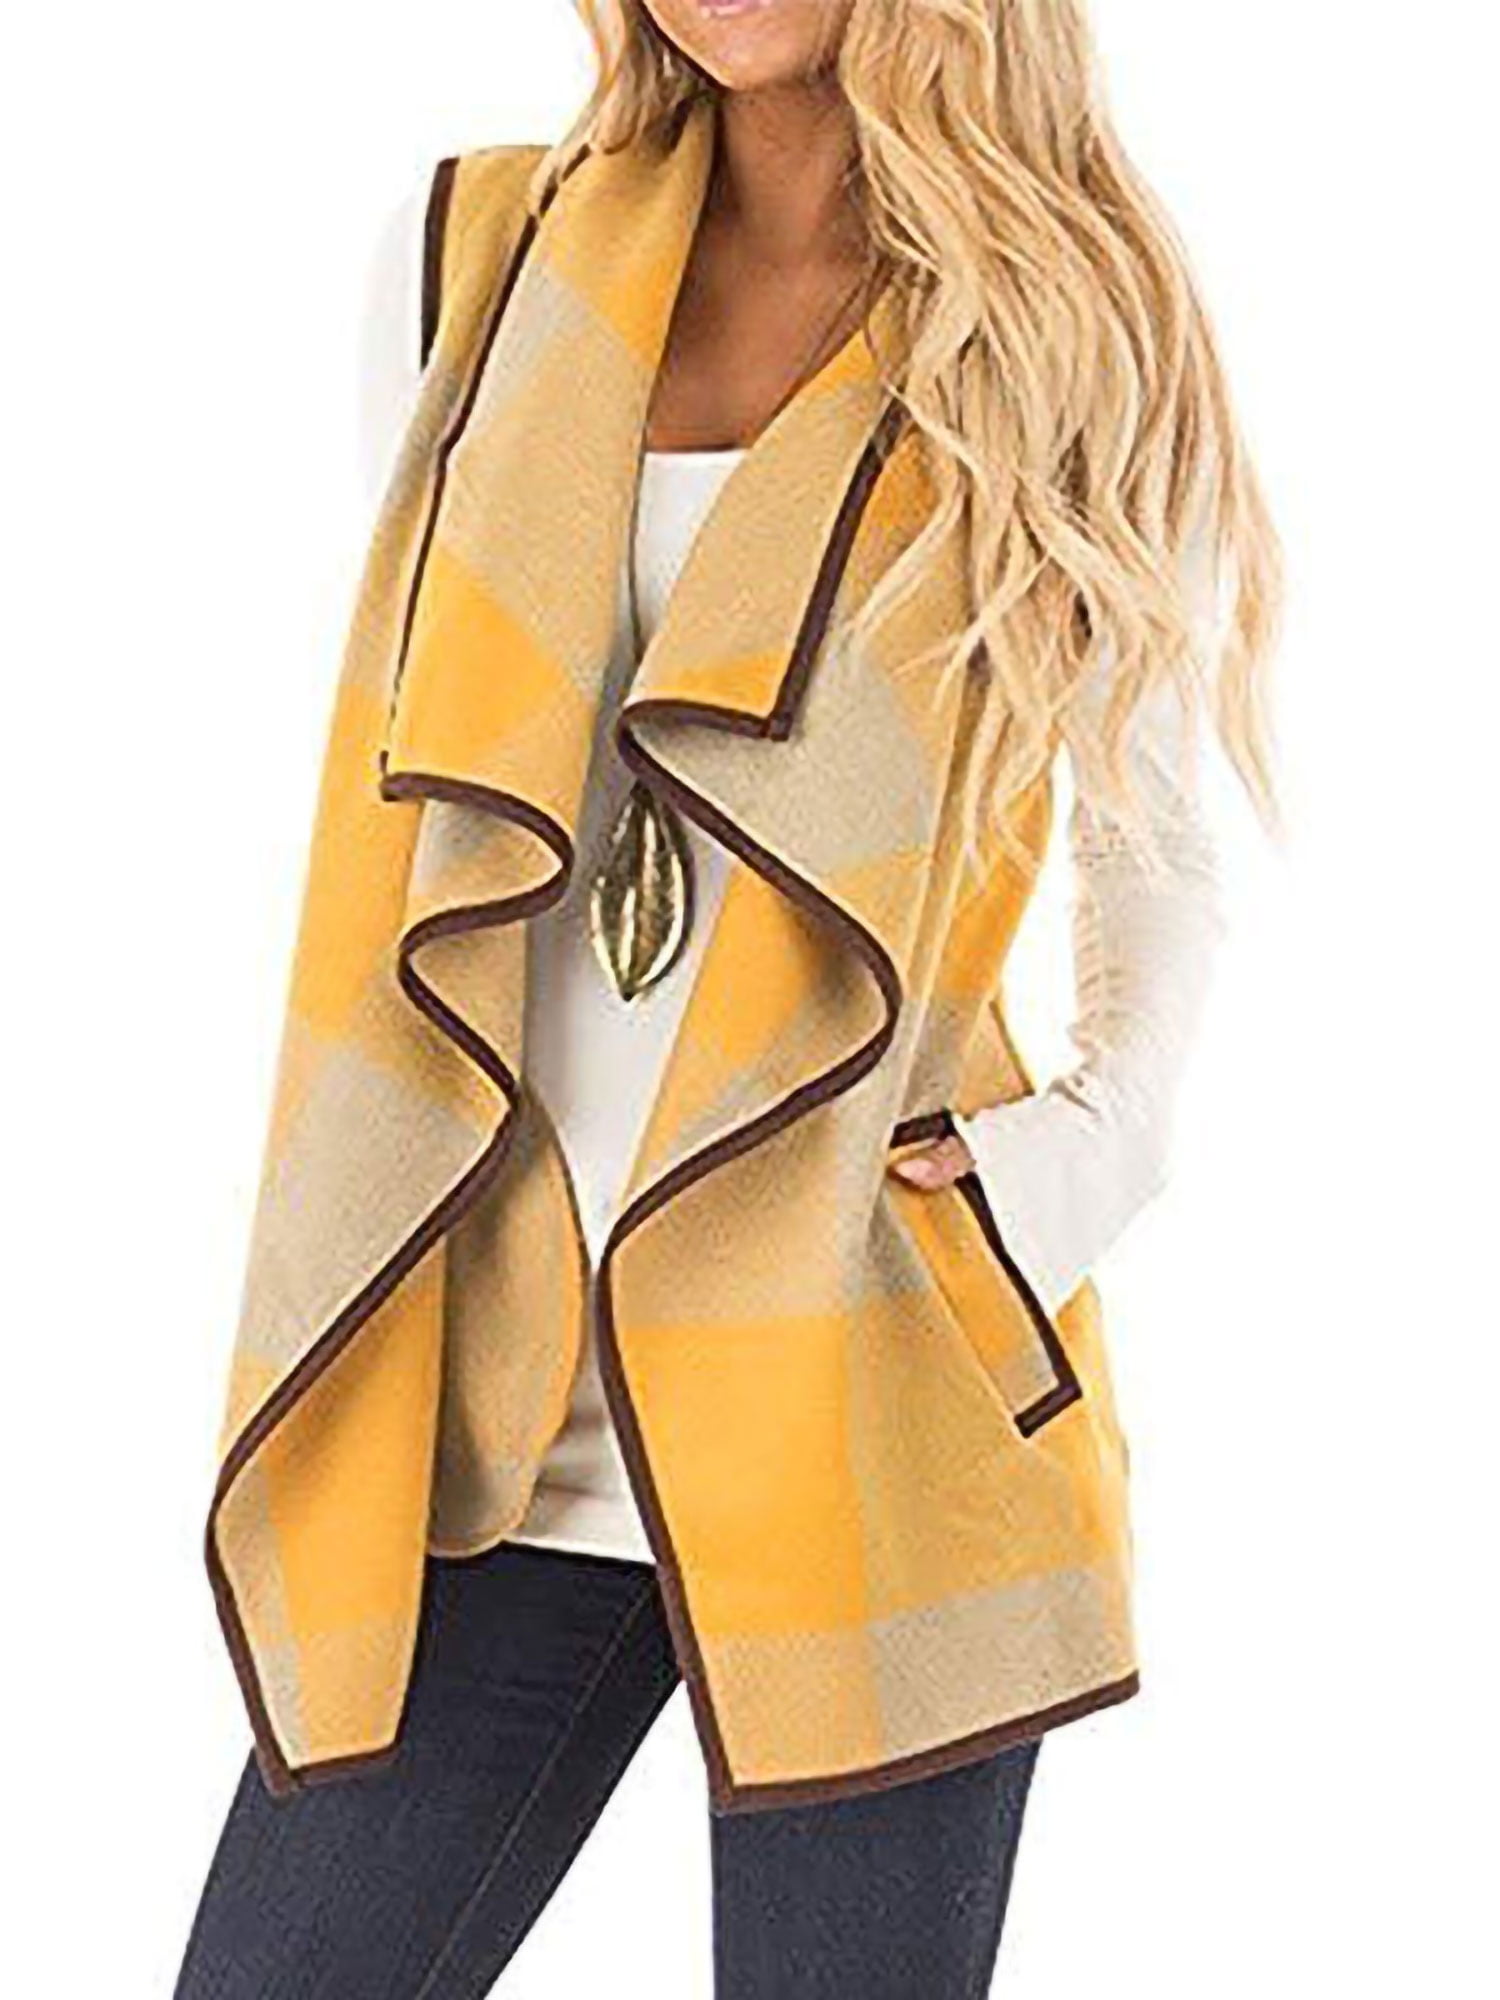 Womens Plus Size Sleeveless Open Front Long Cardigan Vest Casual Draped Lightweight Trench Coats